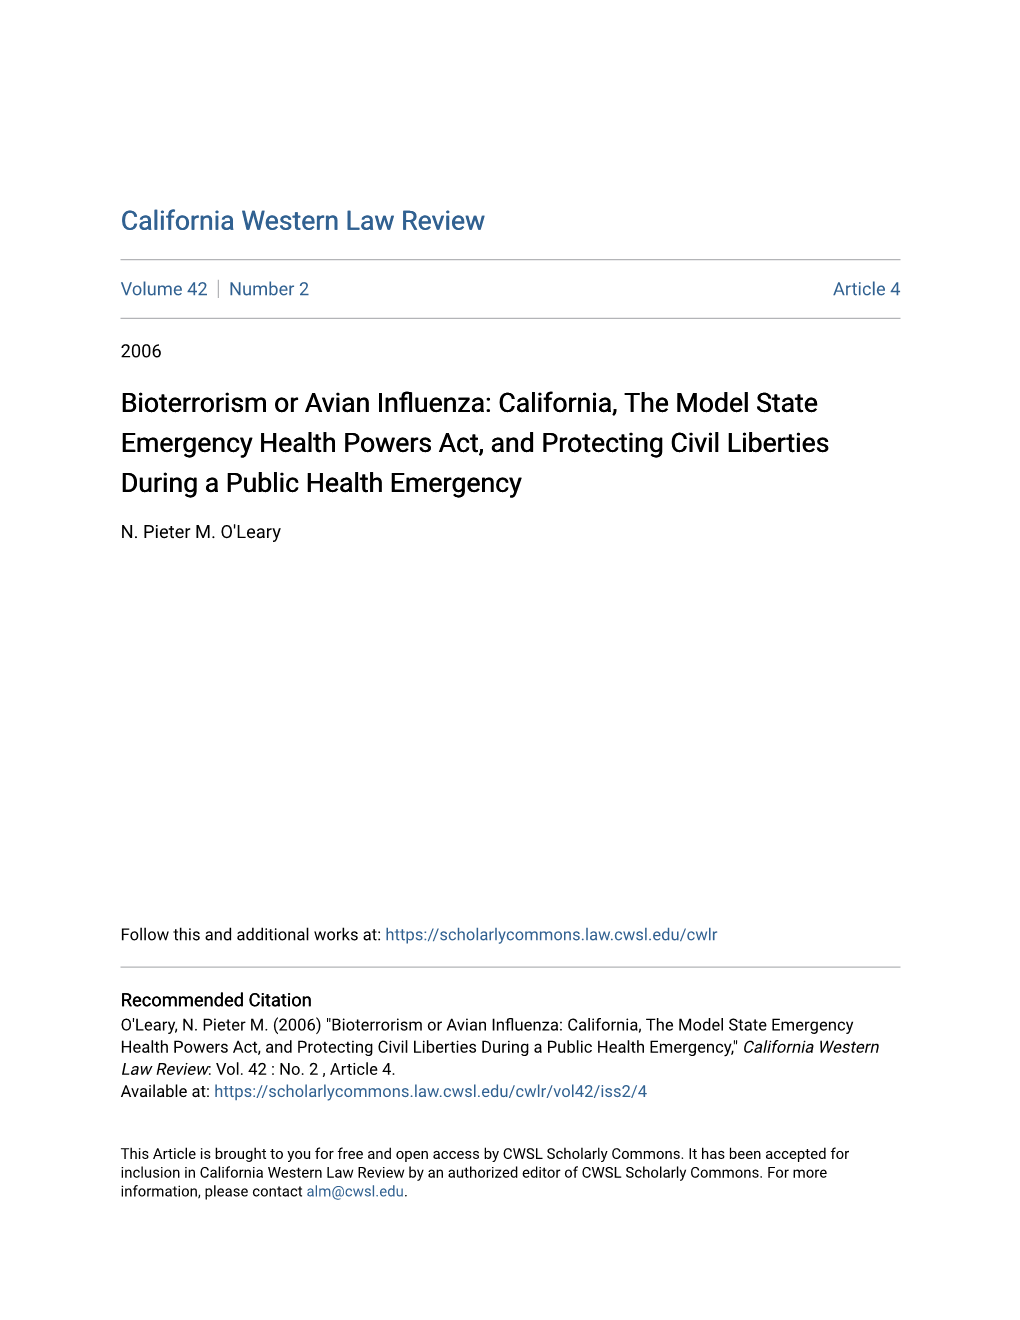 California, the Model State Emergency Health Powers Act, and Protecting Civil Liberties During a Public Health Emergency